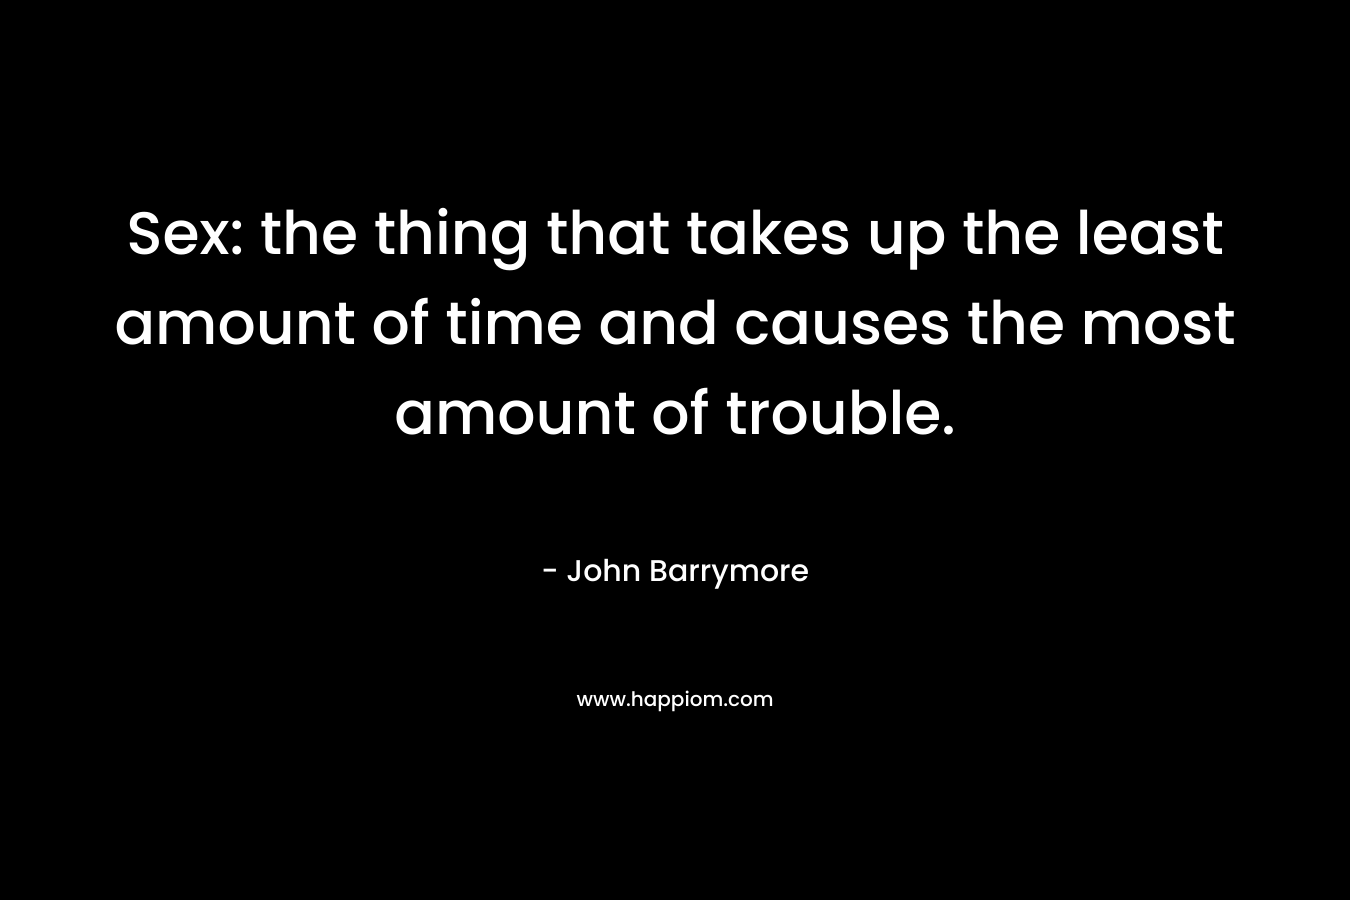 Sex: the thing that takes up the least amount of time and causes the most amount of trouble. – John Barrymore